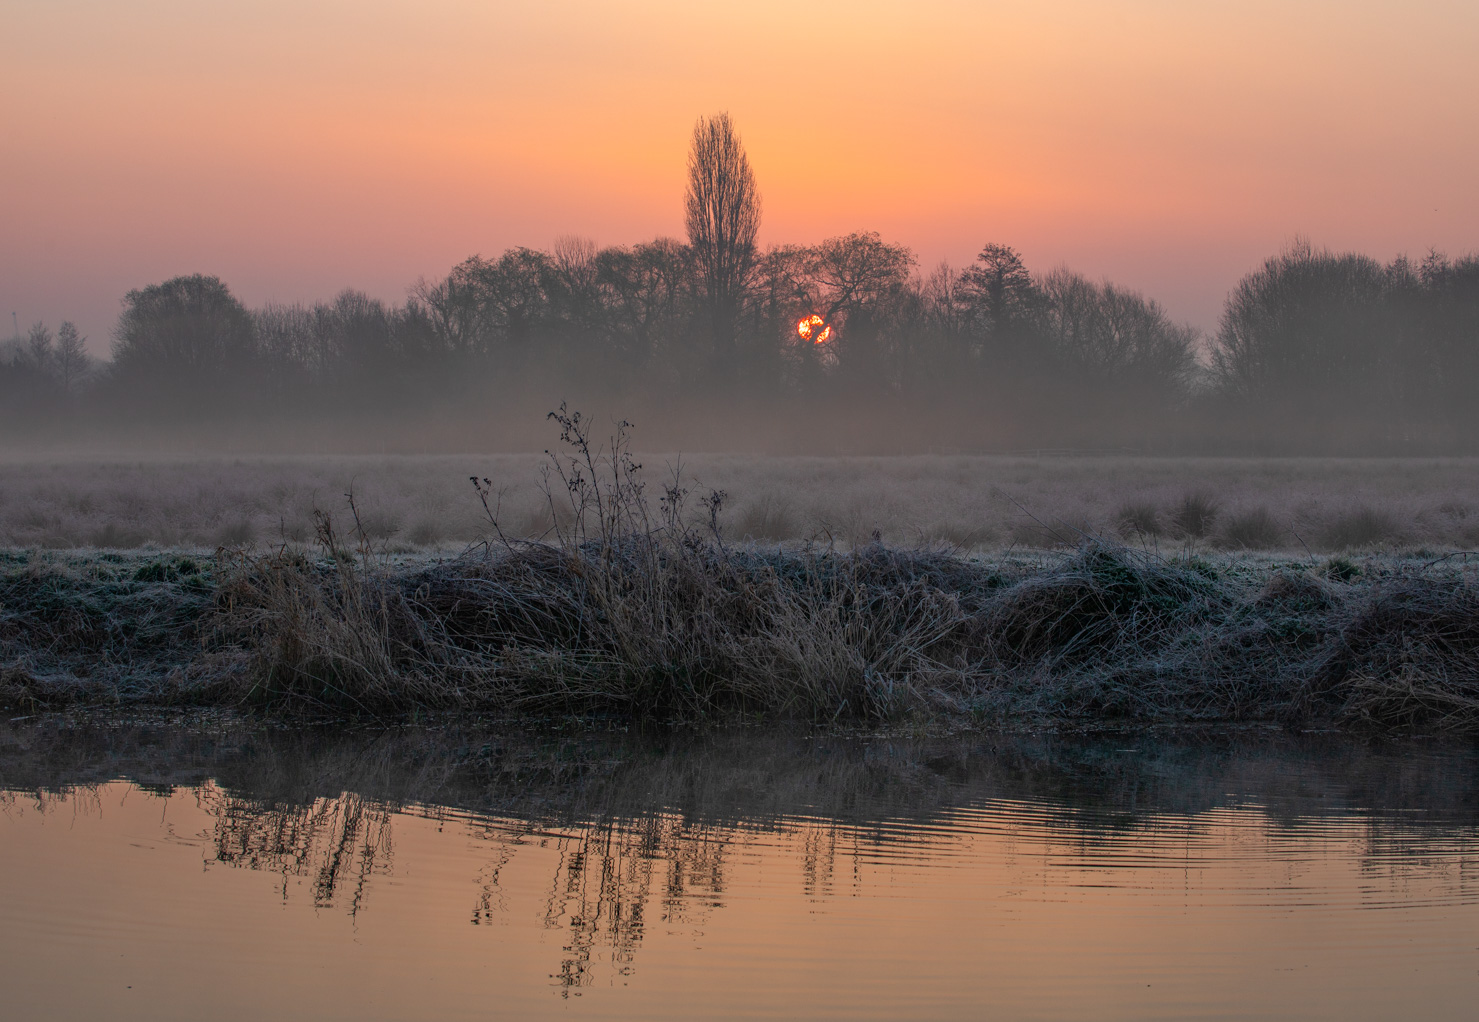 I arrived at Grantchester meadows on a cold March morning in 2022 with the intention of photographing the barn owl, but had to capture the colours of this beautiful sunrise, aided by the slight haze on the horizon which reduced the glare from the sun. One of my favourite photos, I have a print of this up on my wall.